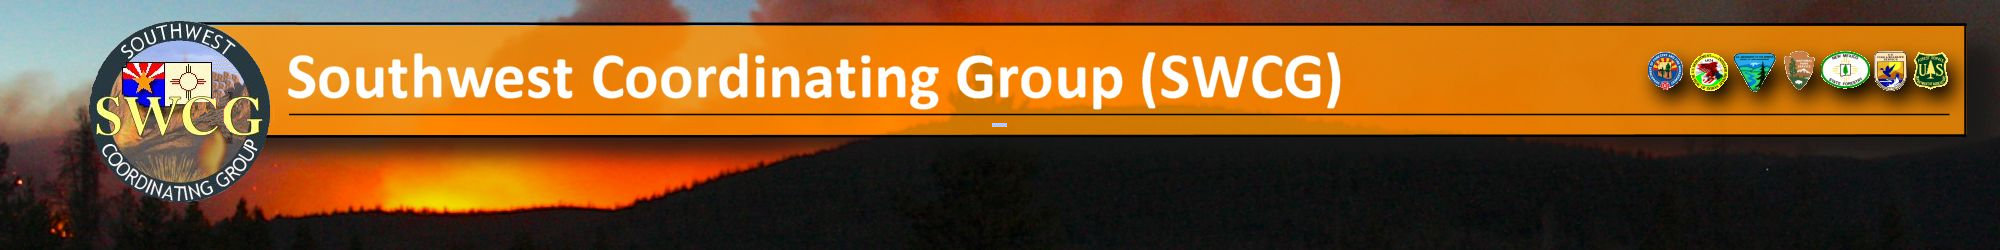 Southwest Coordinating Group Banner